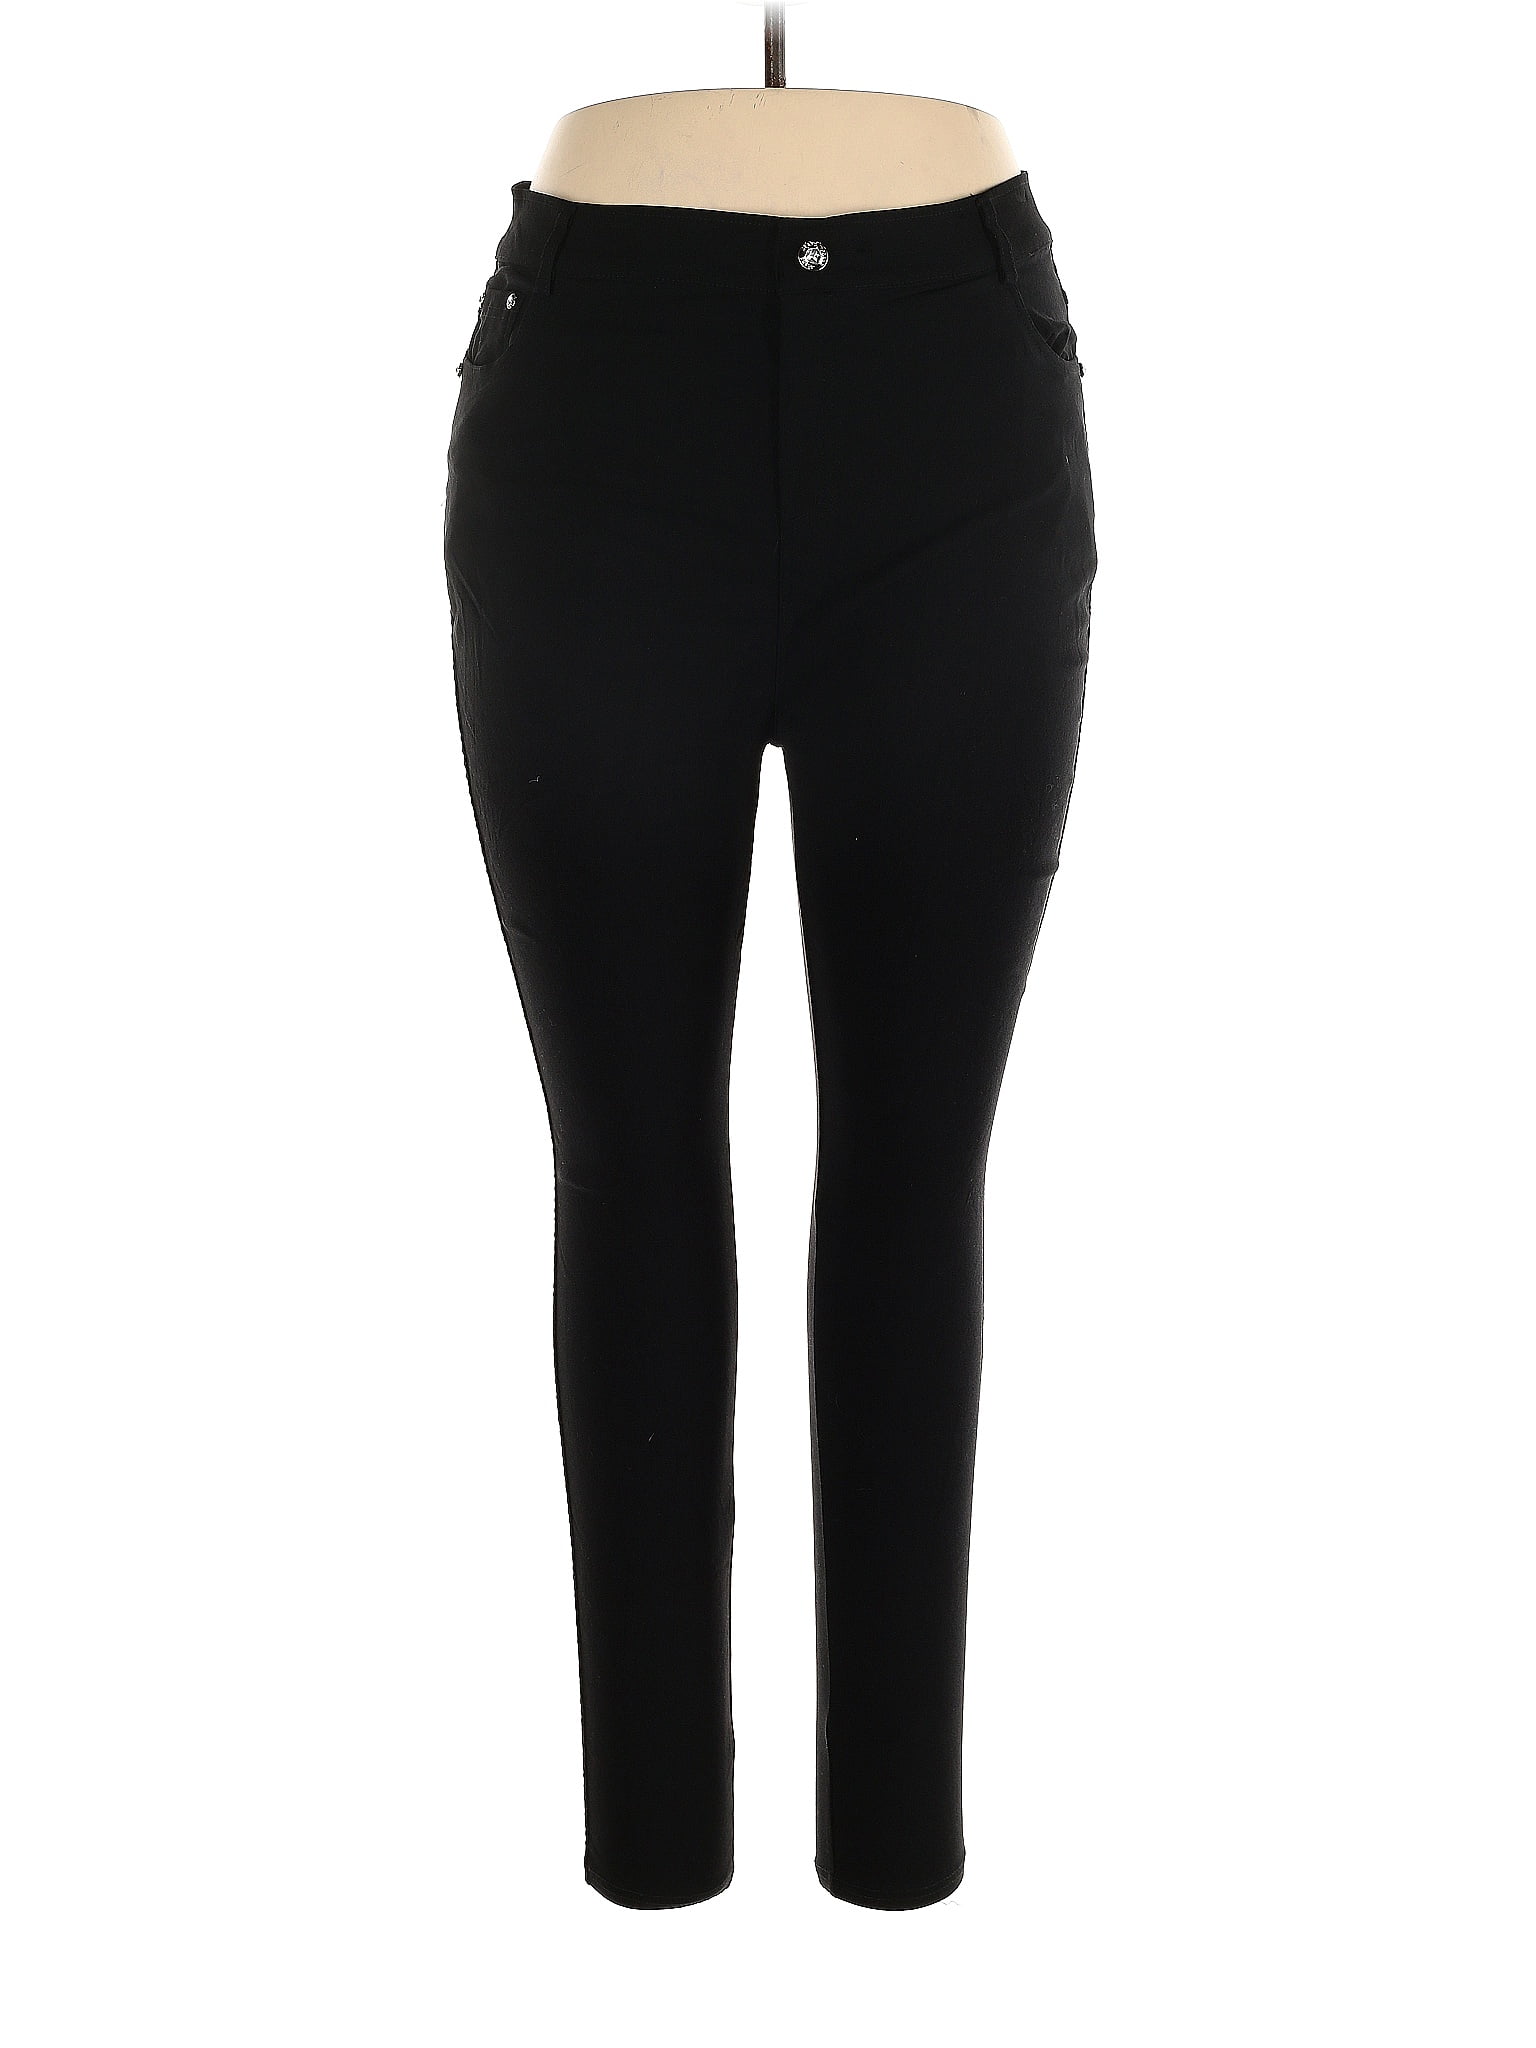 Jeans & Trousers  Brand :Rio,Good Quality Black Jeggings Size S/M